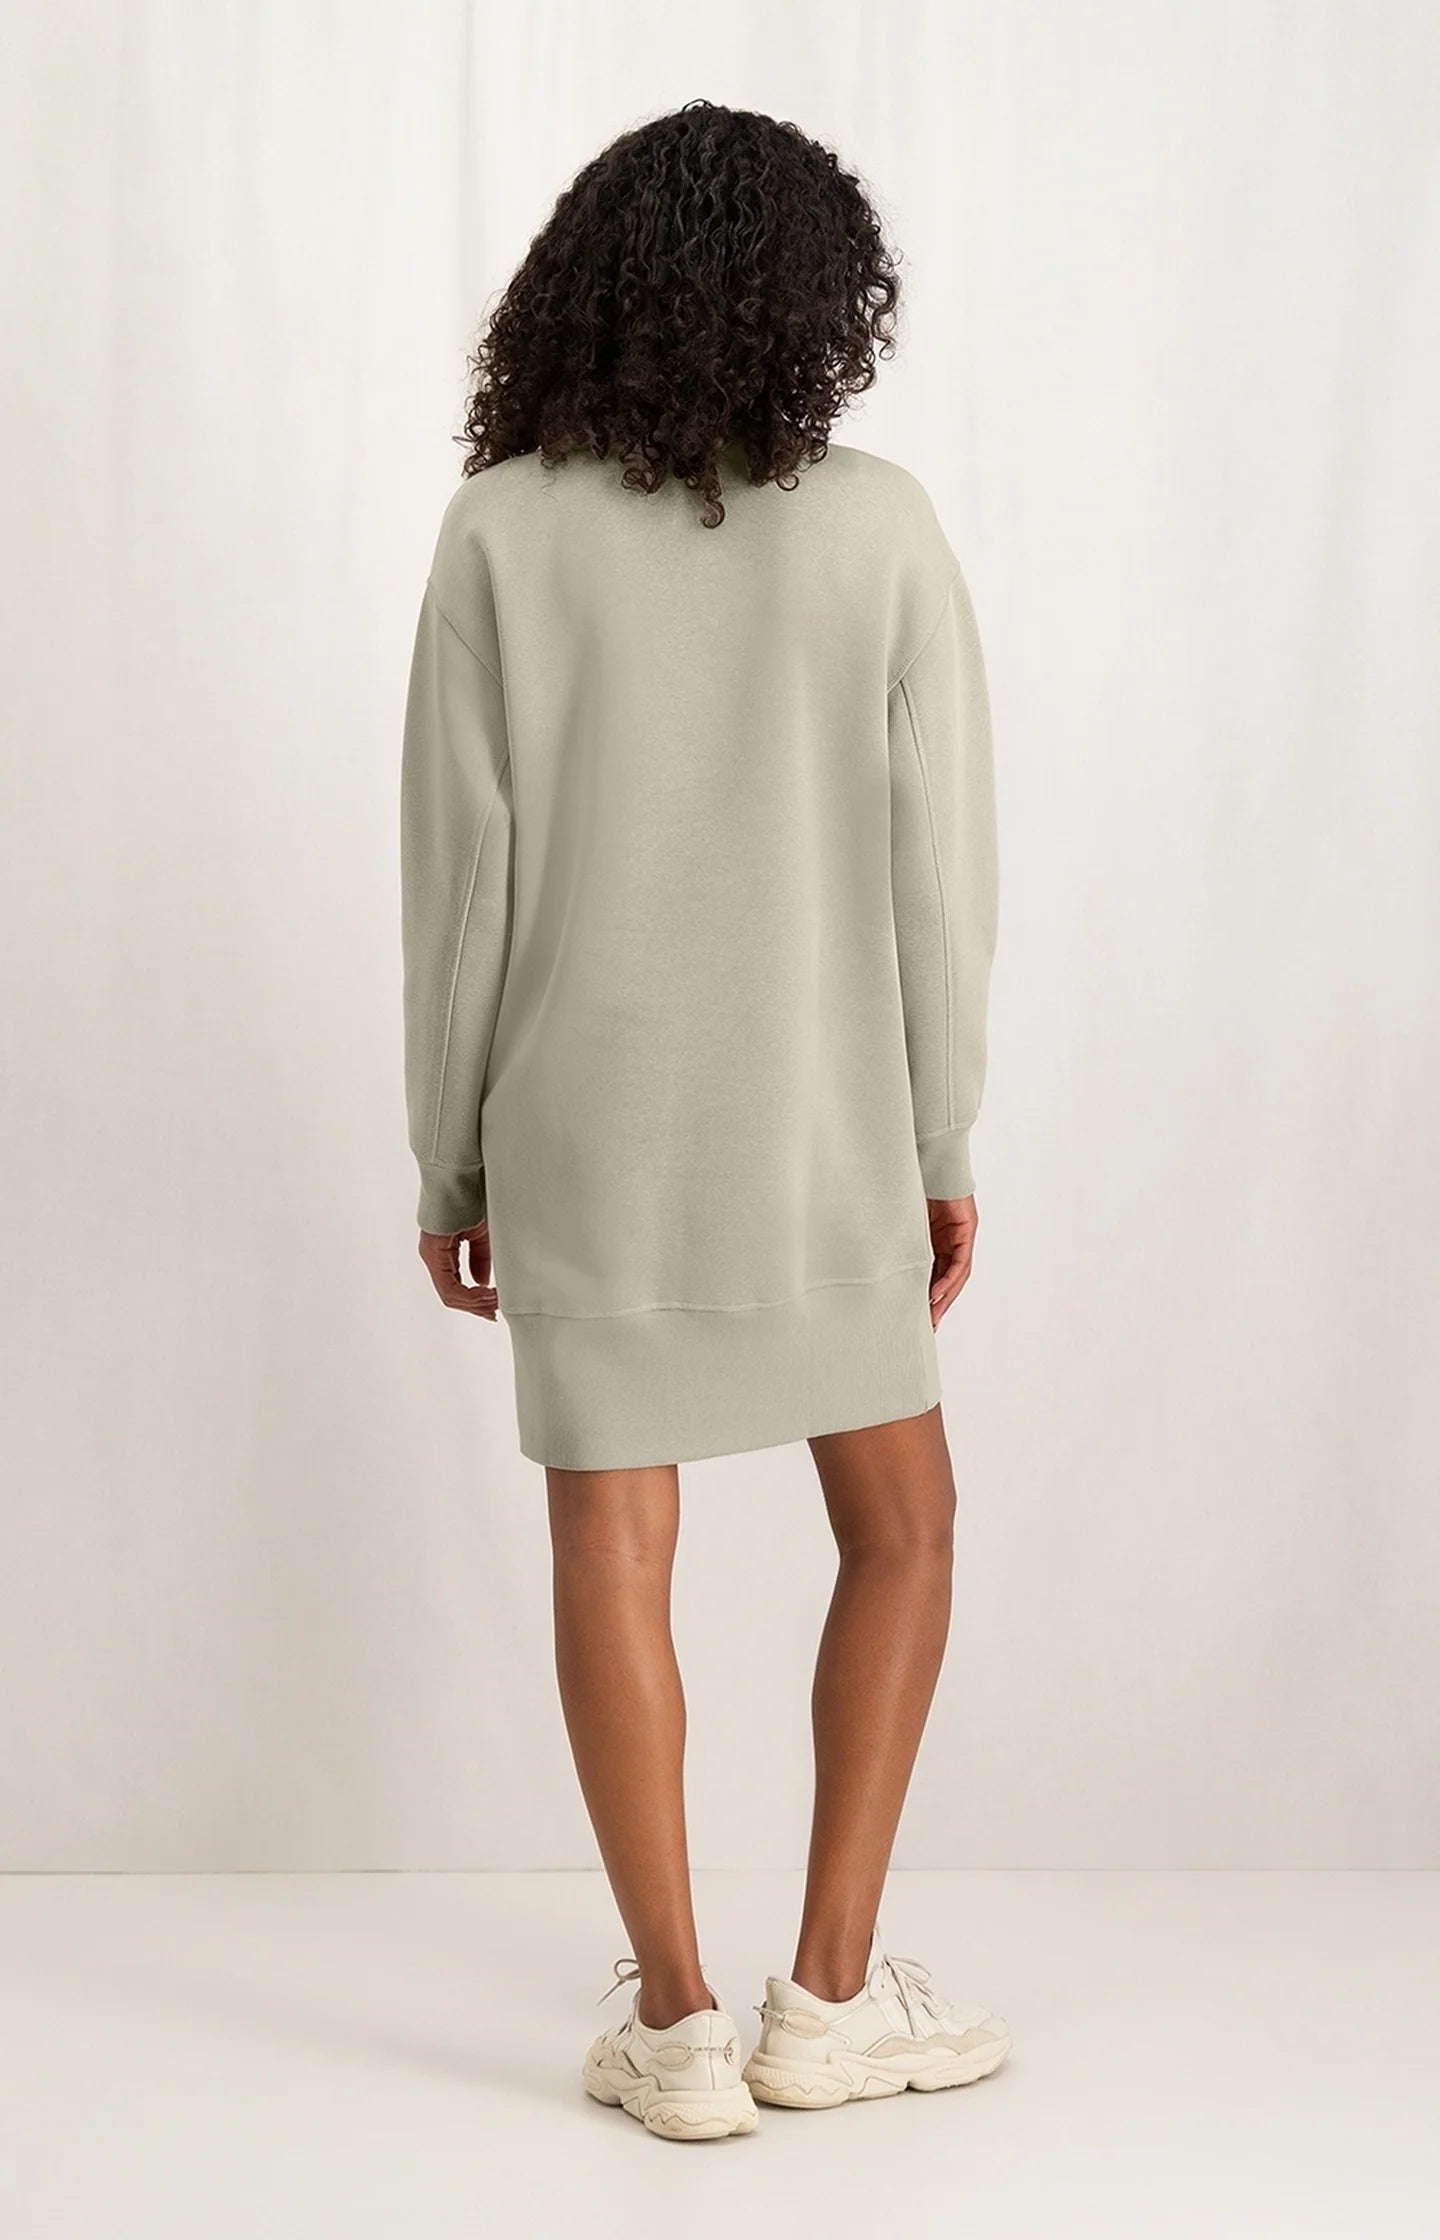 Sweat dress with high neck